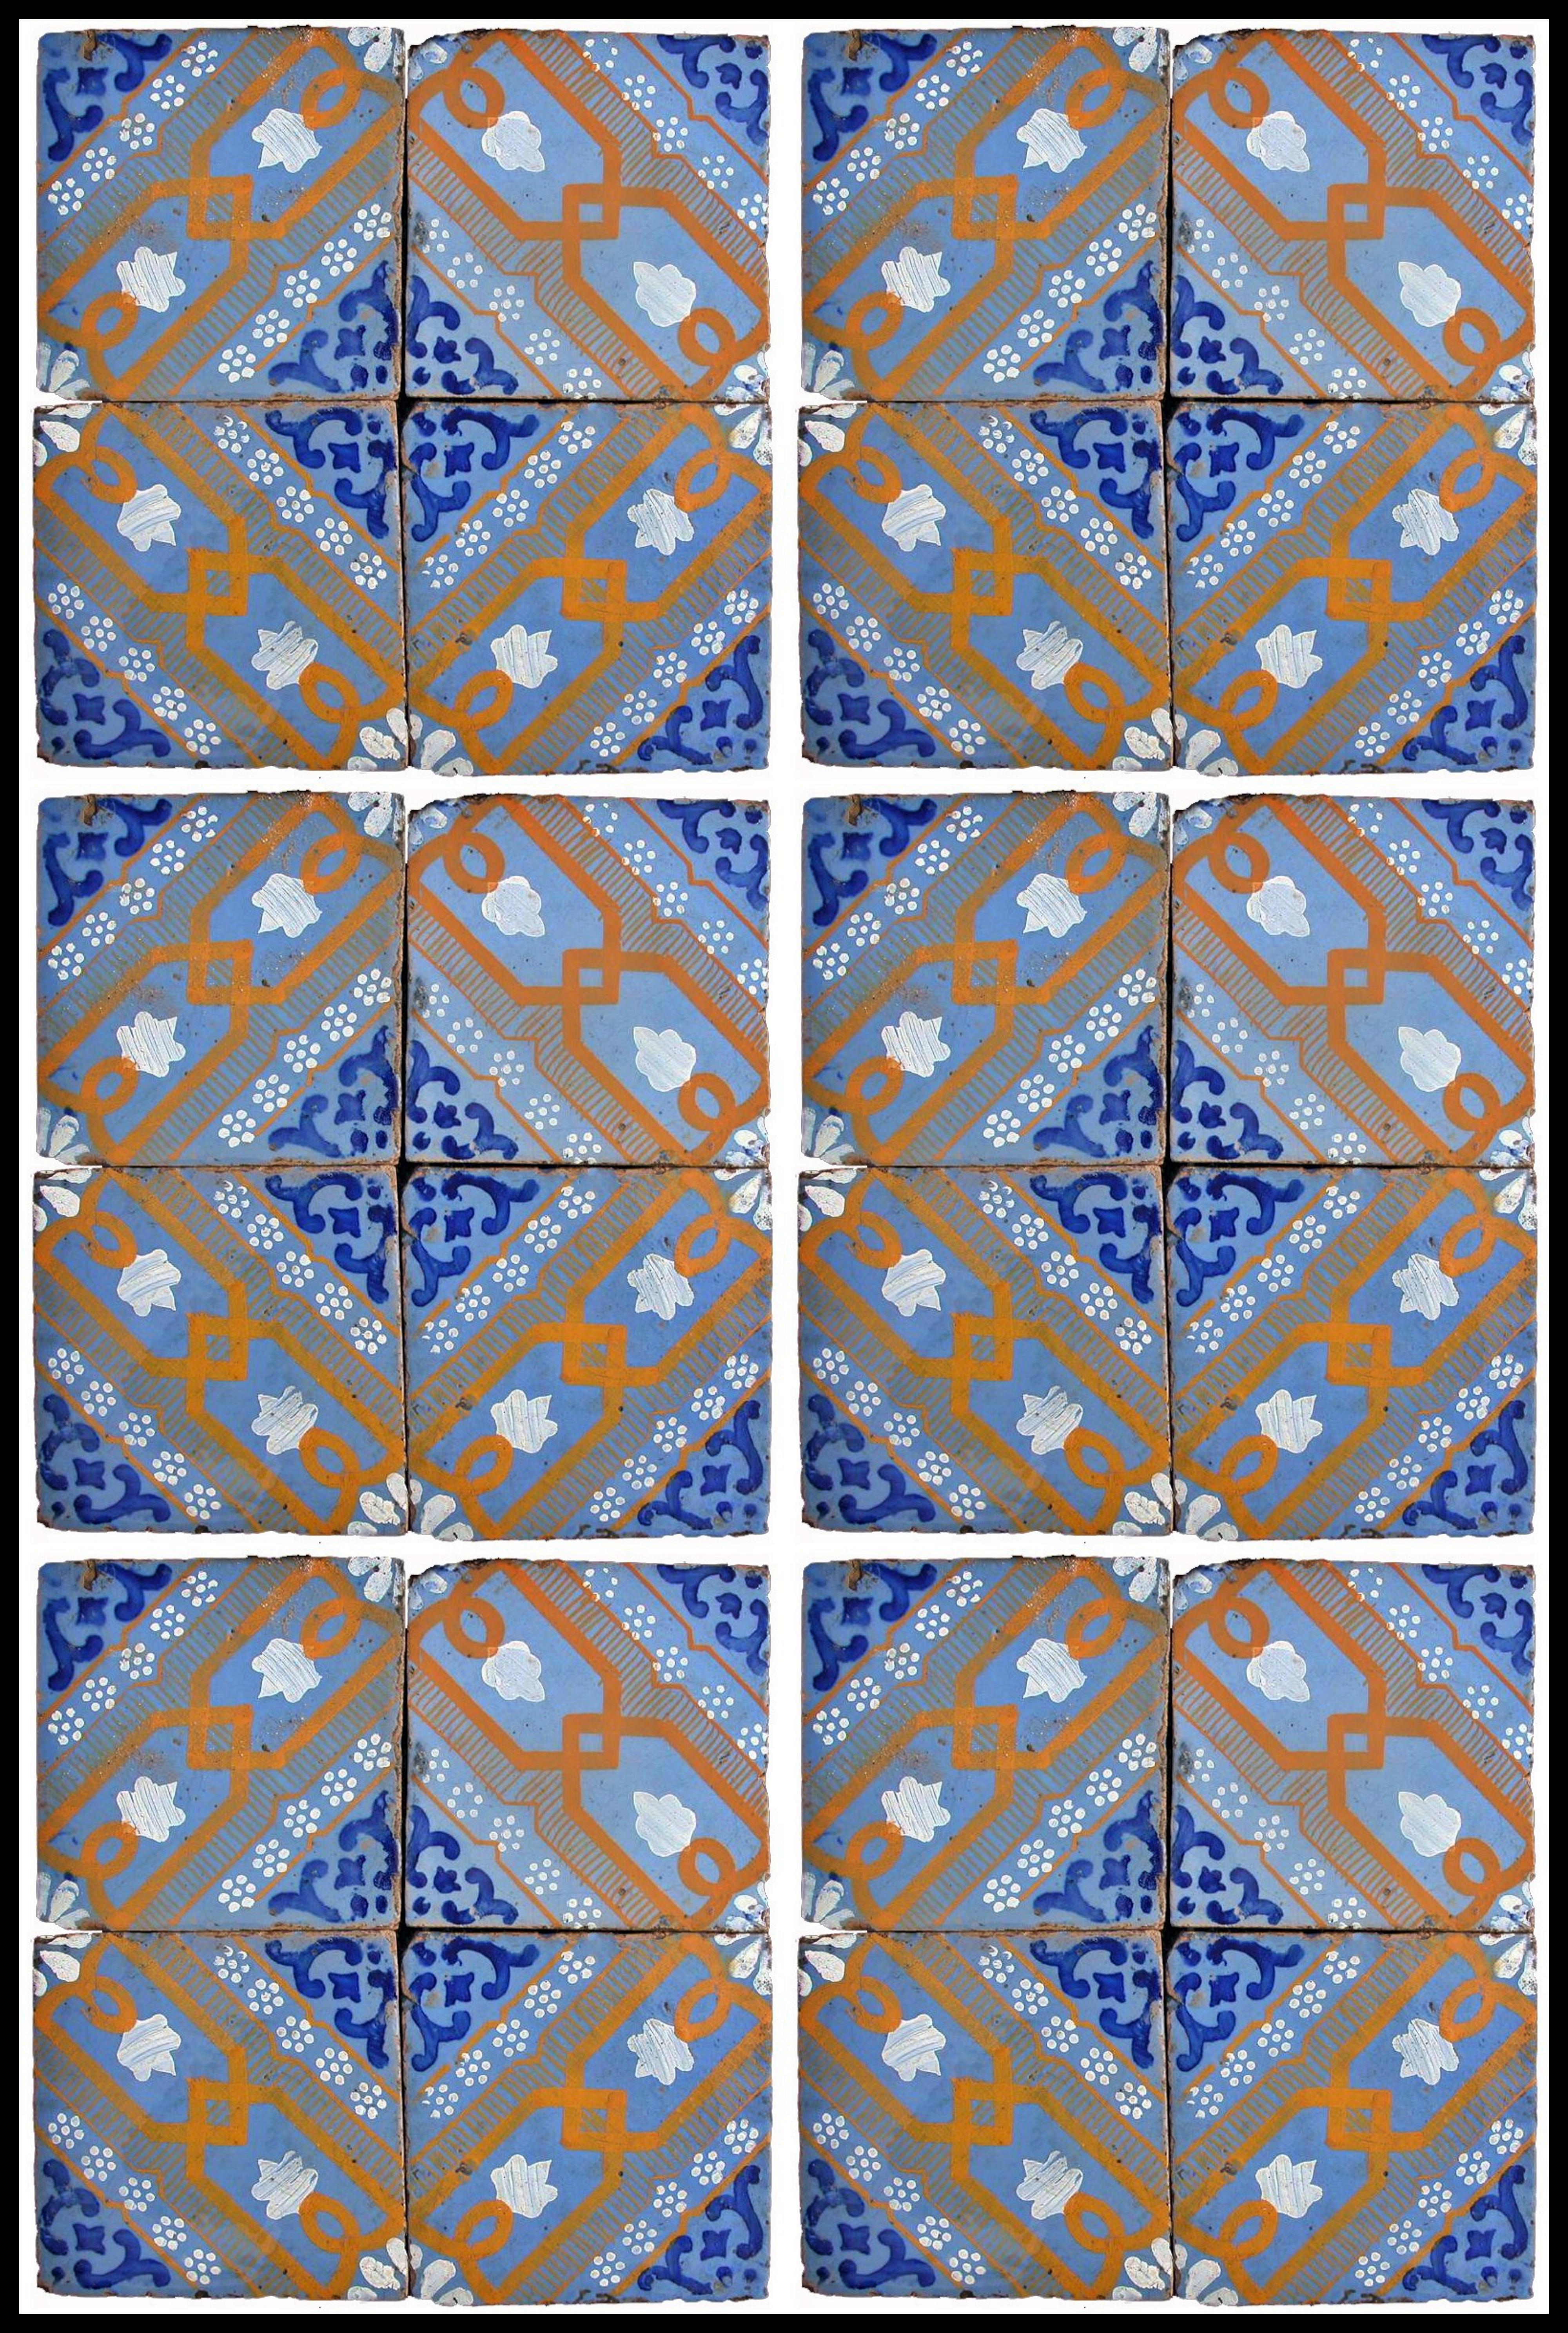 24 ANCIENT MAJOLICA TILES FROM THE LIBERTY ERA 1894 / 1910 Art Nouveau

Original white and manganese relief tile.
Relief tile.

AVAILABILITY OF 210 TILES

HEIGHT 80 cm
WIDTH 80 cm
THICKNESS 1.7 cm
WEIGHT 1.3 Kg
HISTORICAL PERIOD 1894 / 1910 Art